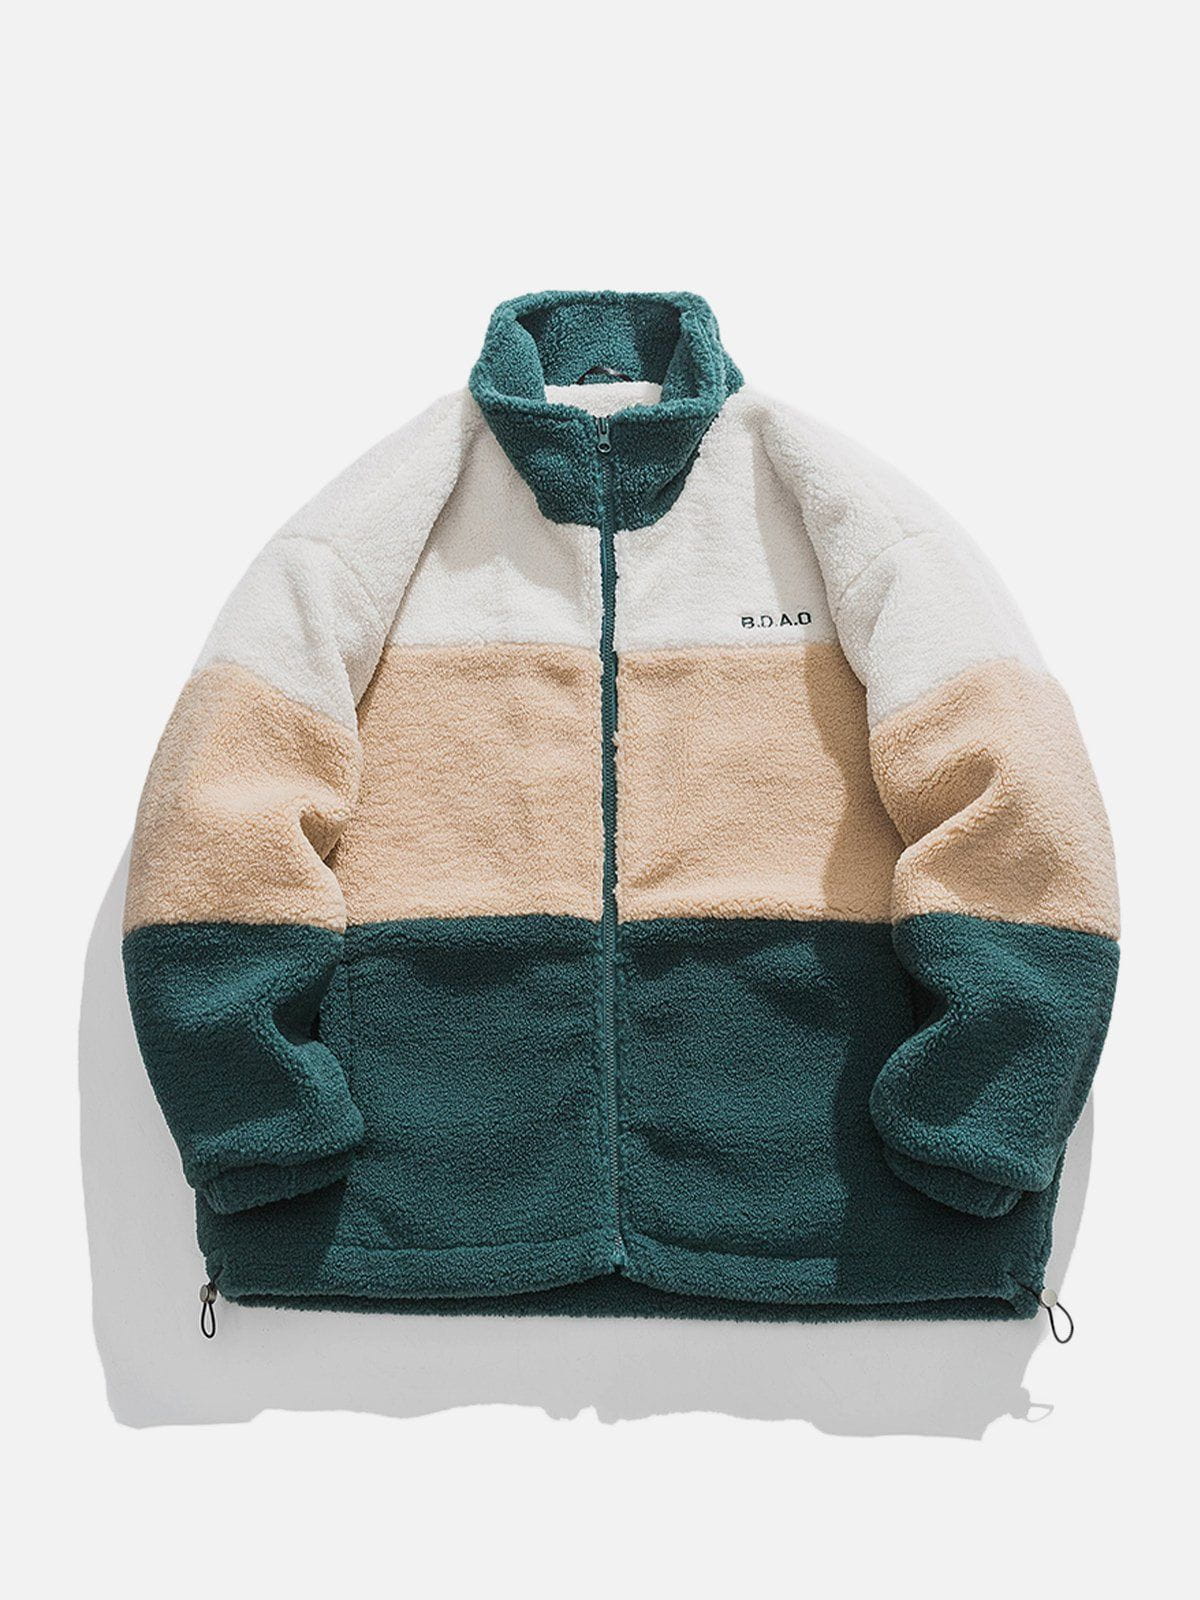 Sneakerland™ - Three-color Patchwork Sherpa Winter Coat